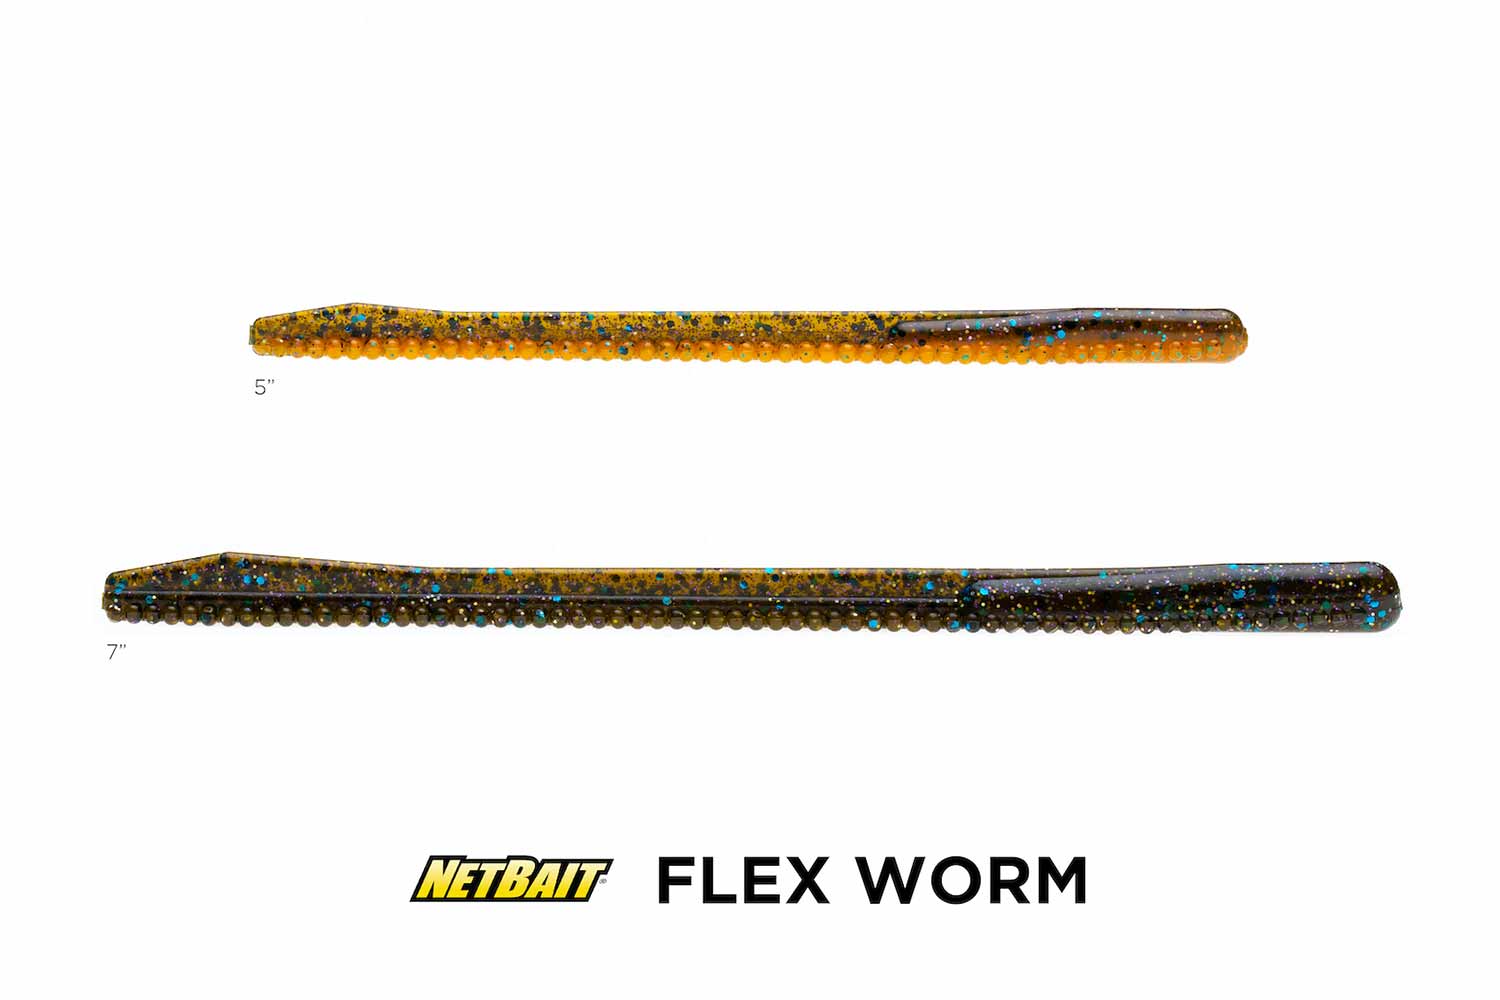 Flex Worm fishing lure on a white background.